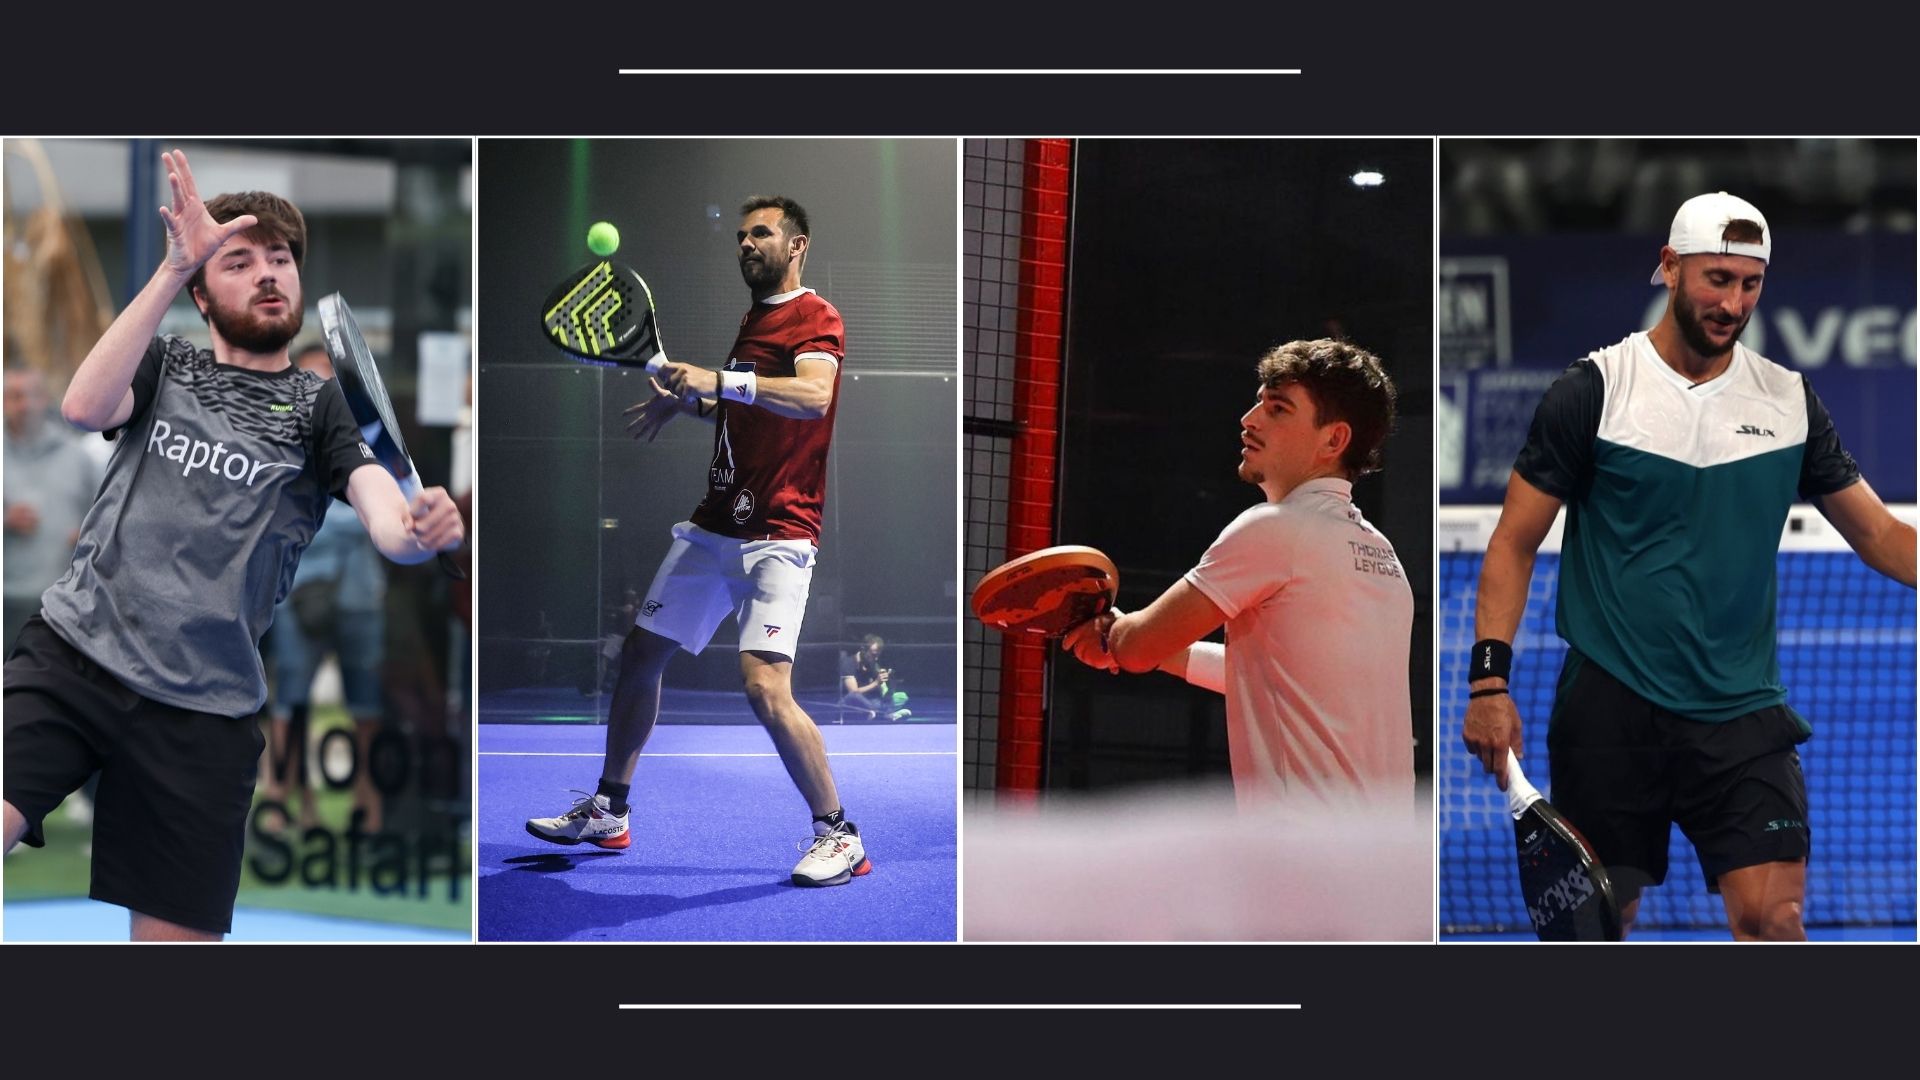 Milan Premier Padel – 4 out of 7 for the French in the first round of previa